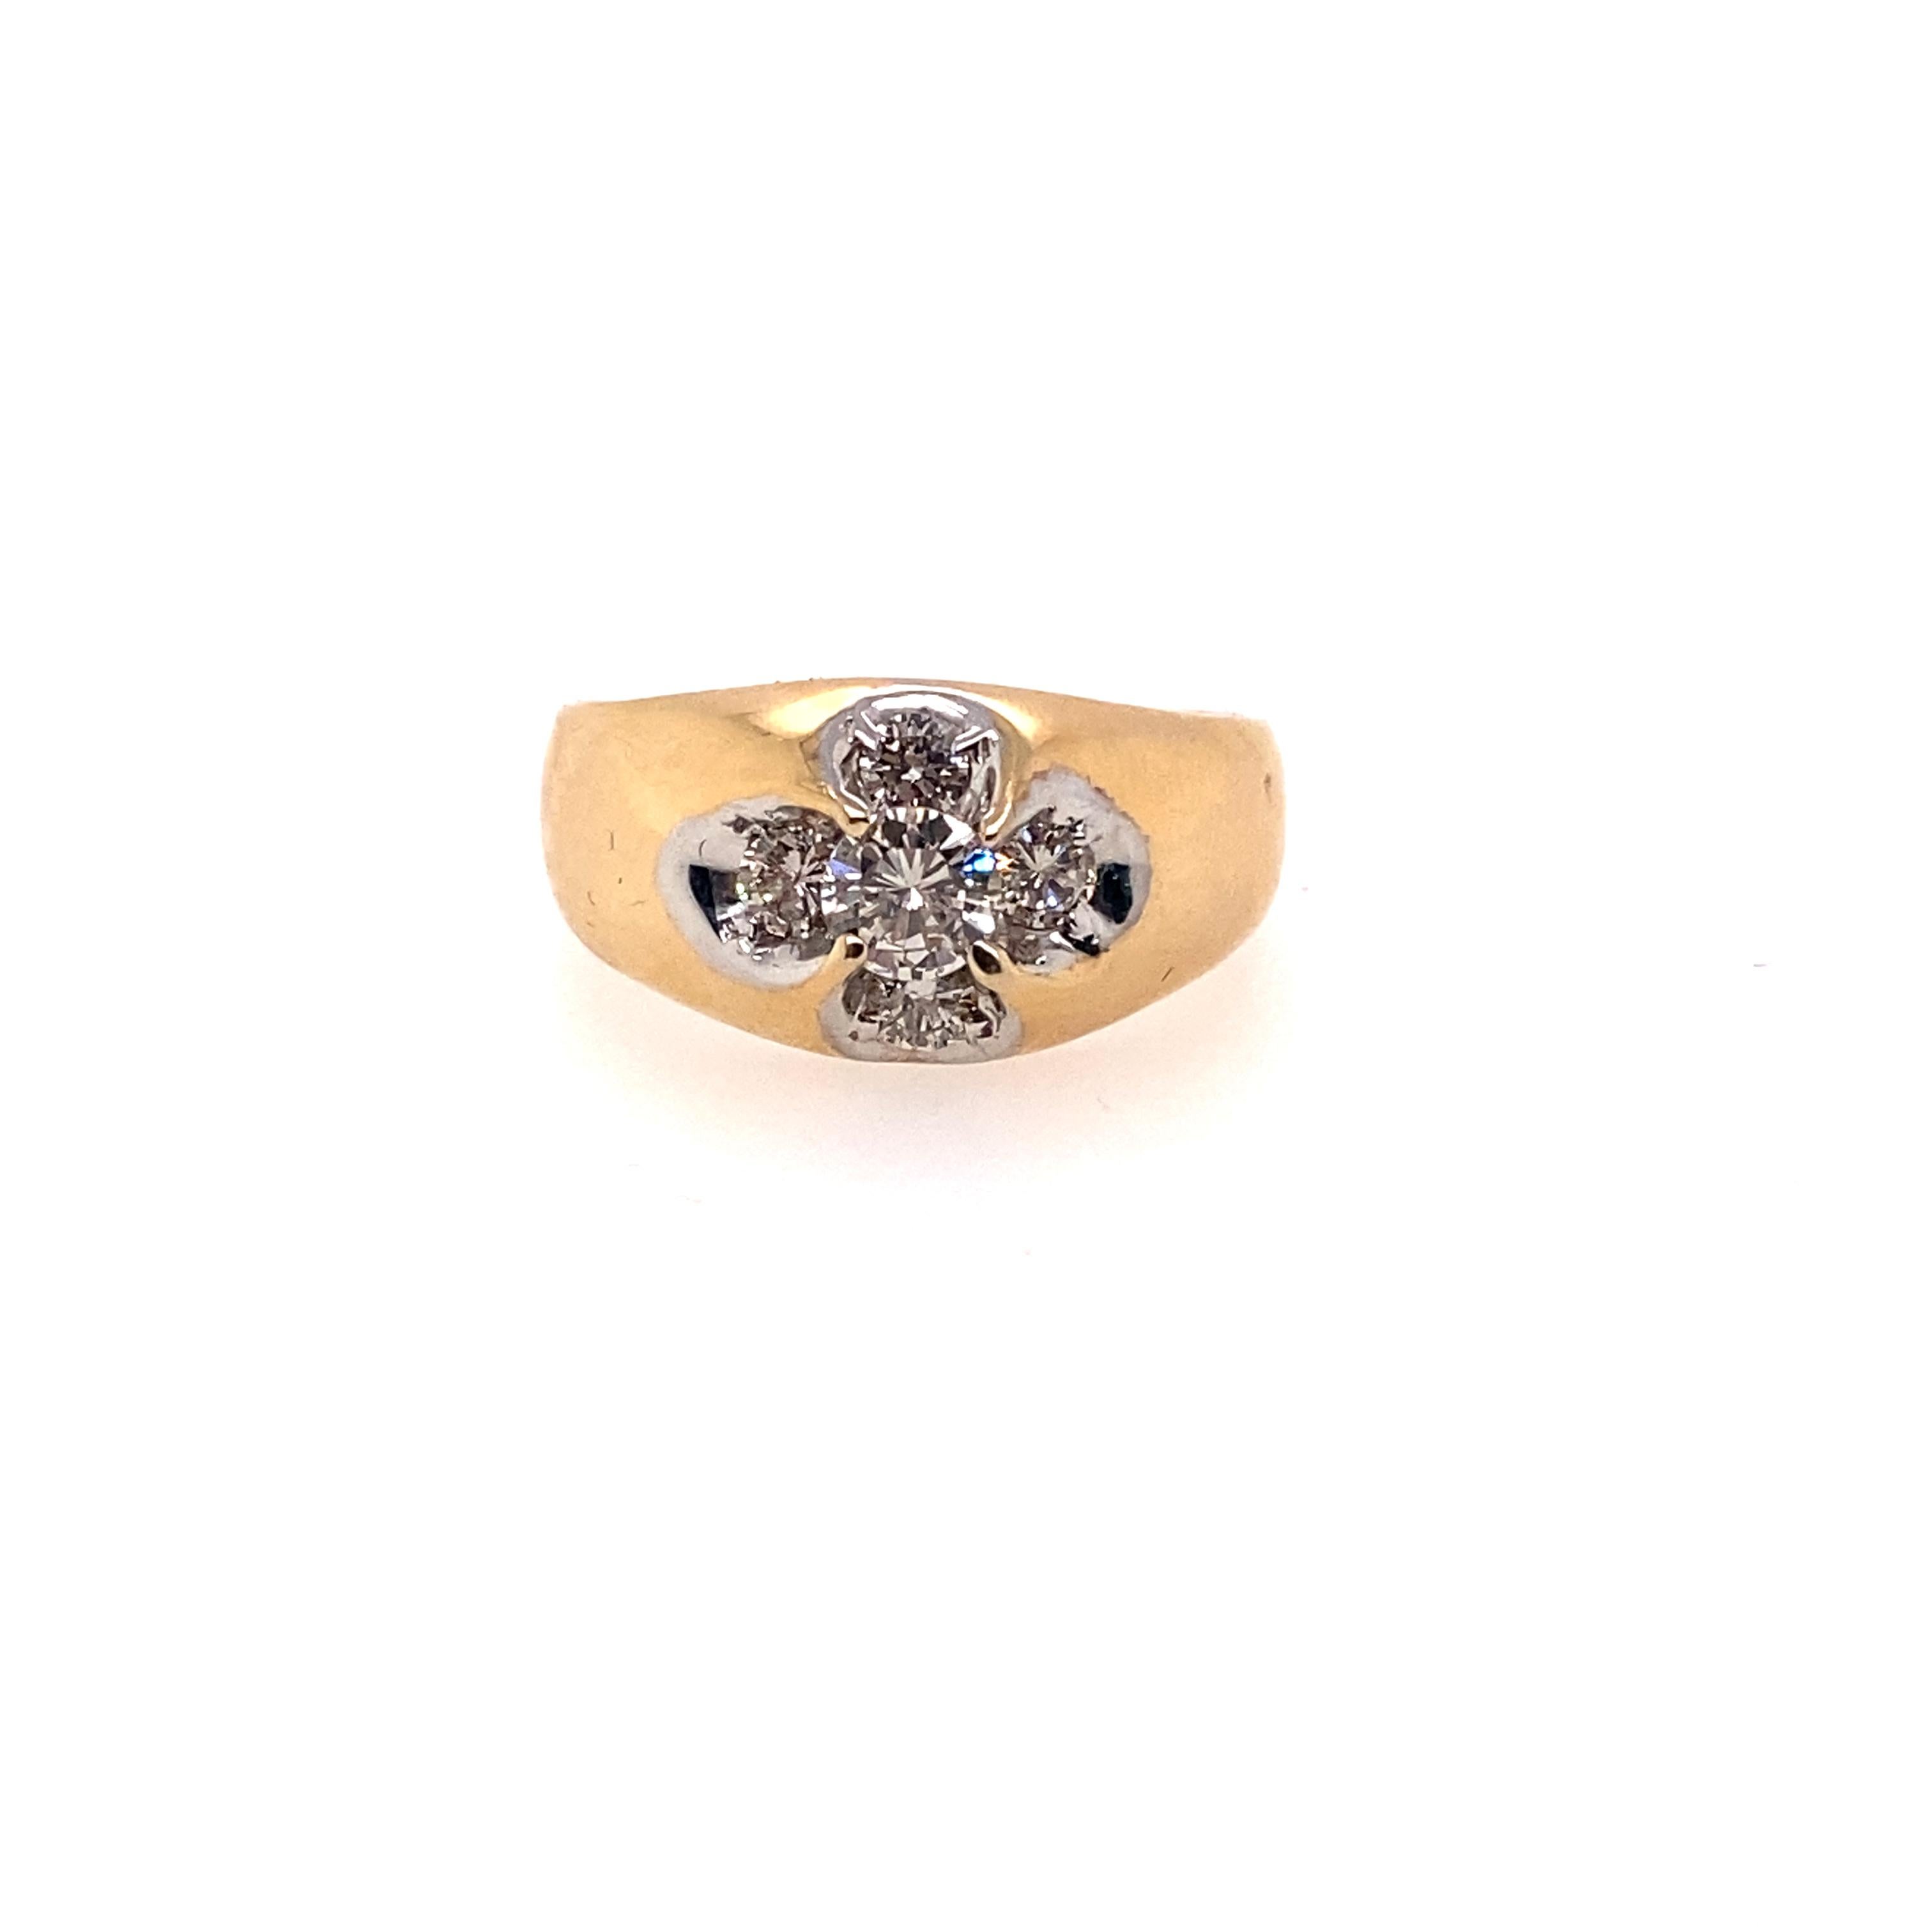 14 Karat yellow gold dome ring set with 5 diamonds totaling about 1.00 carats of round diamonds by flower design. Dome rings have a natural air of sophisticated vintage playfulness. Wear this chic accessory every day.

Diamonds Weight: 1.00